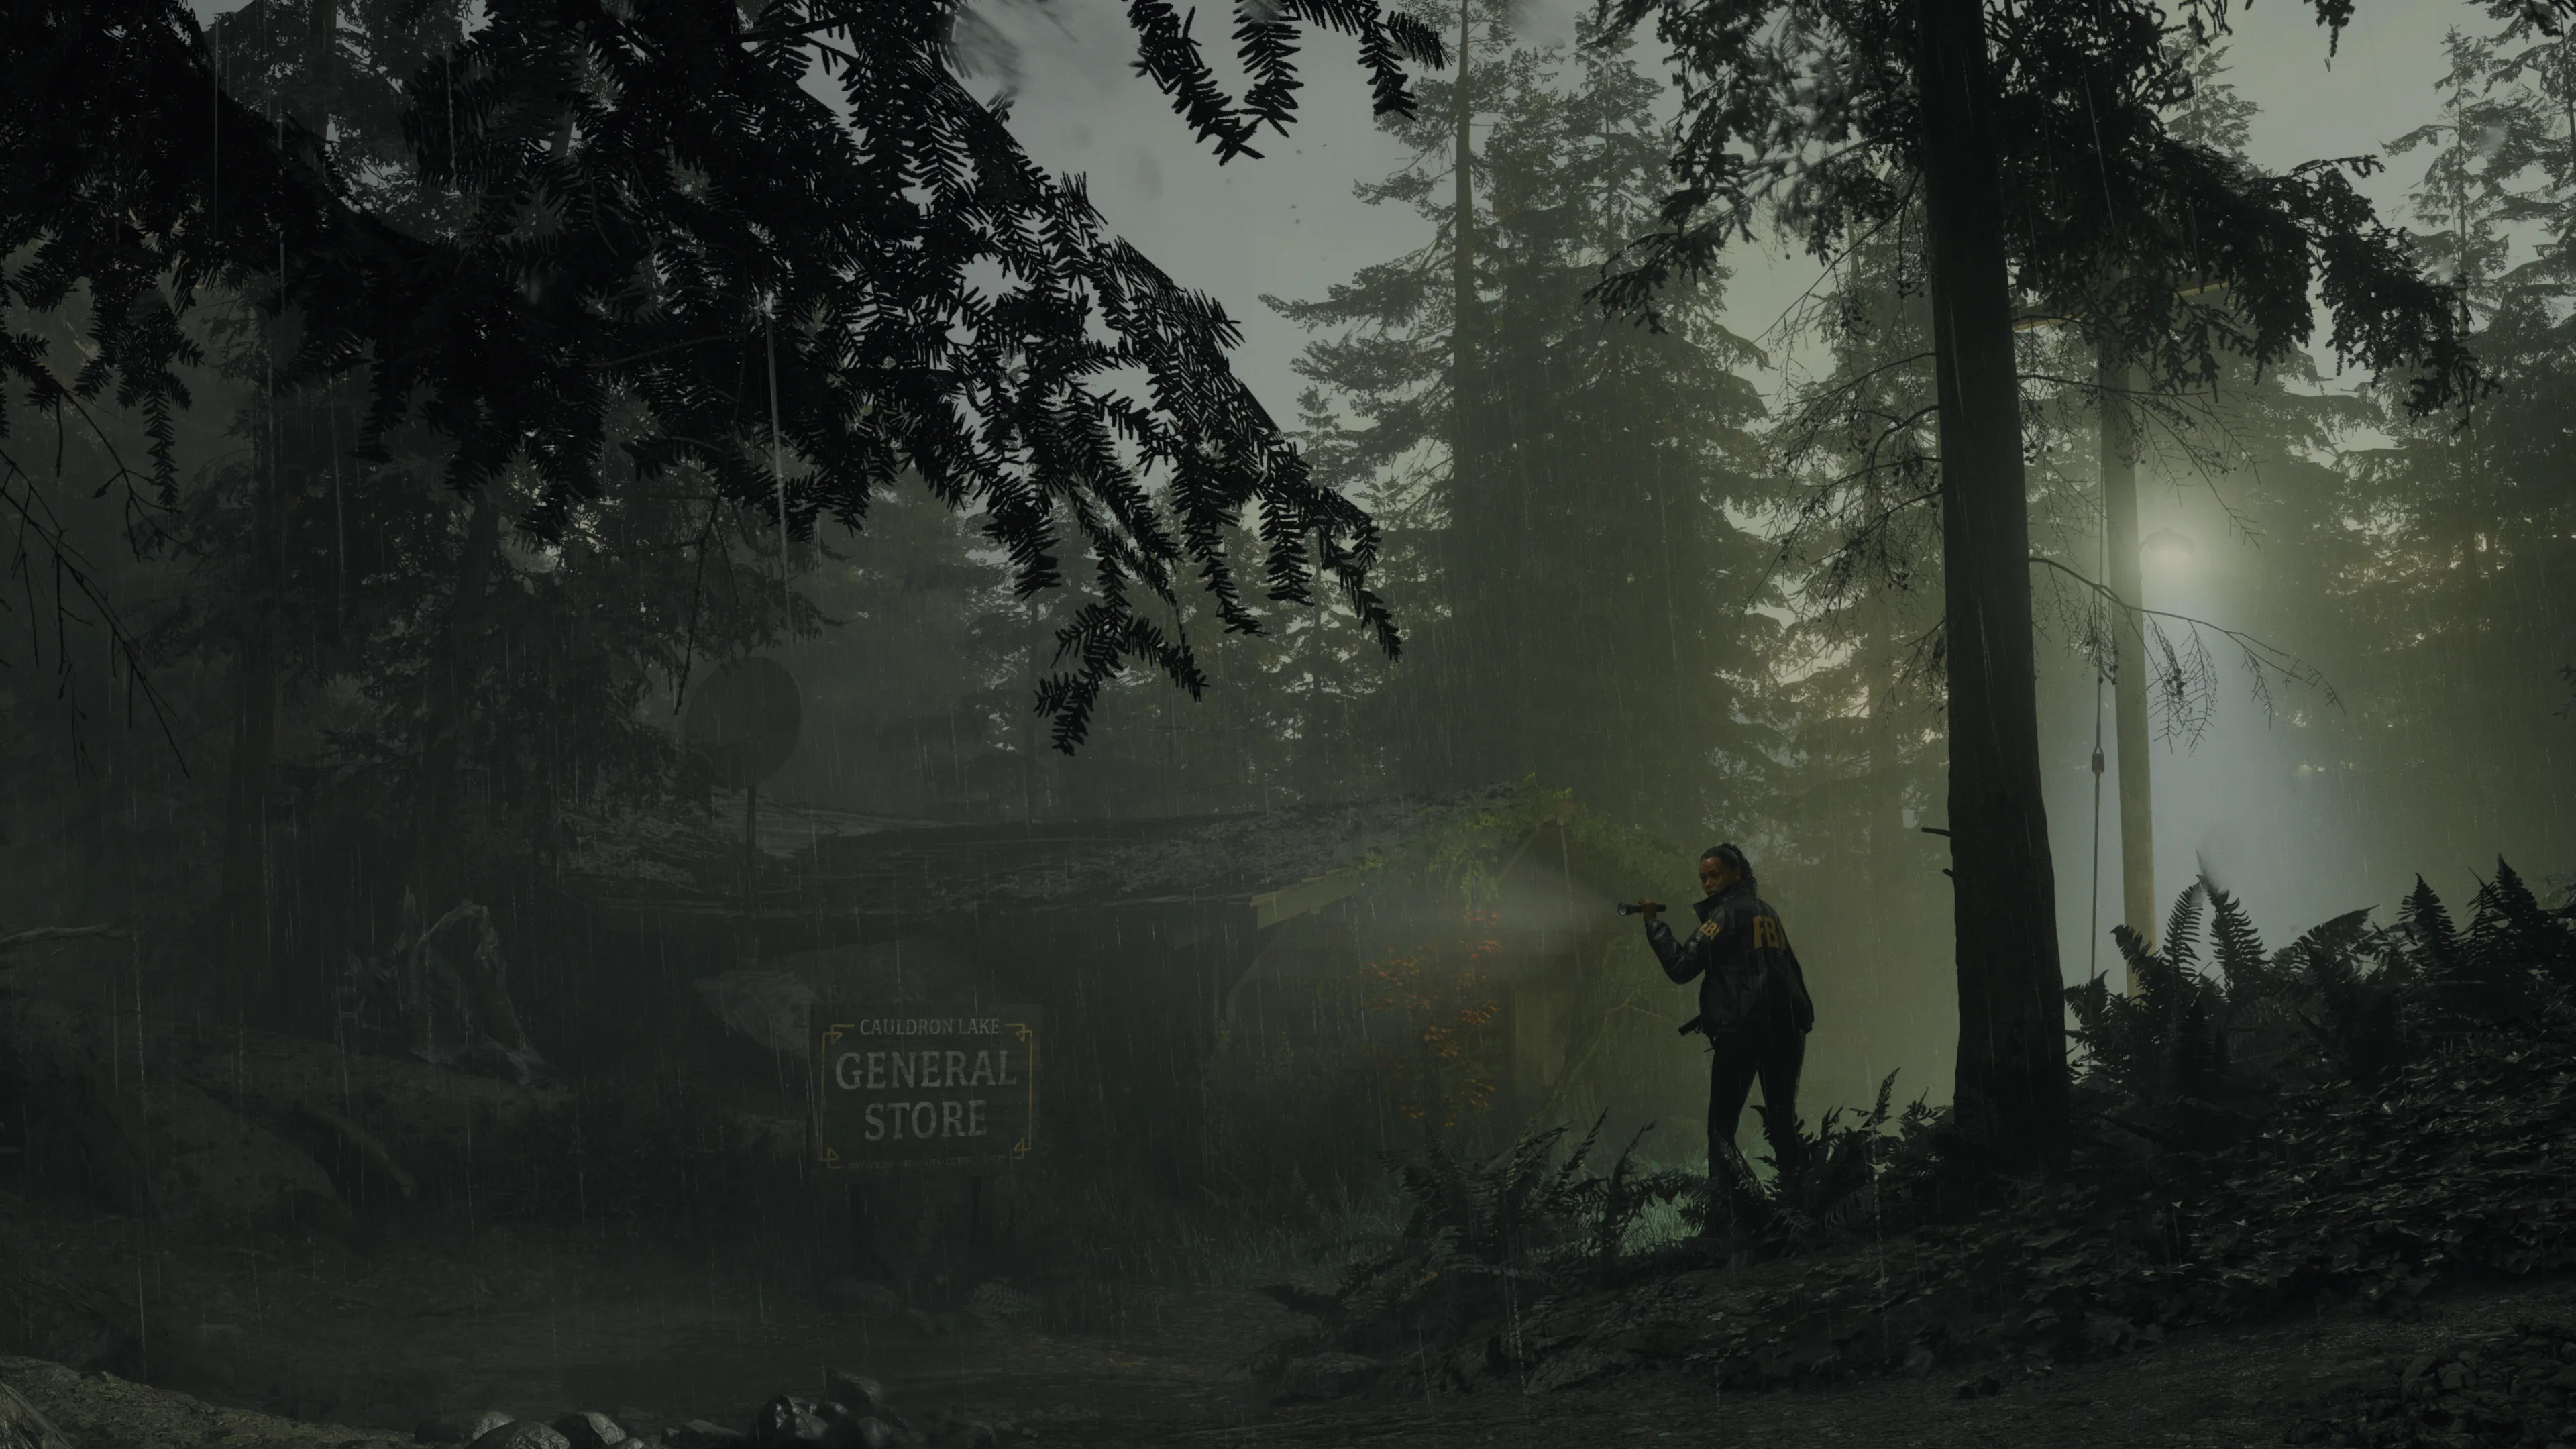 Alan Wake 2 Confirms All Difficulty Modes and New Game Plus for the Sequel  - EssentiallySports